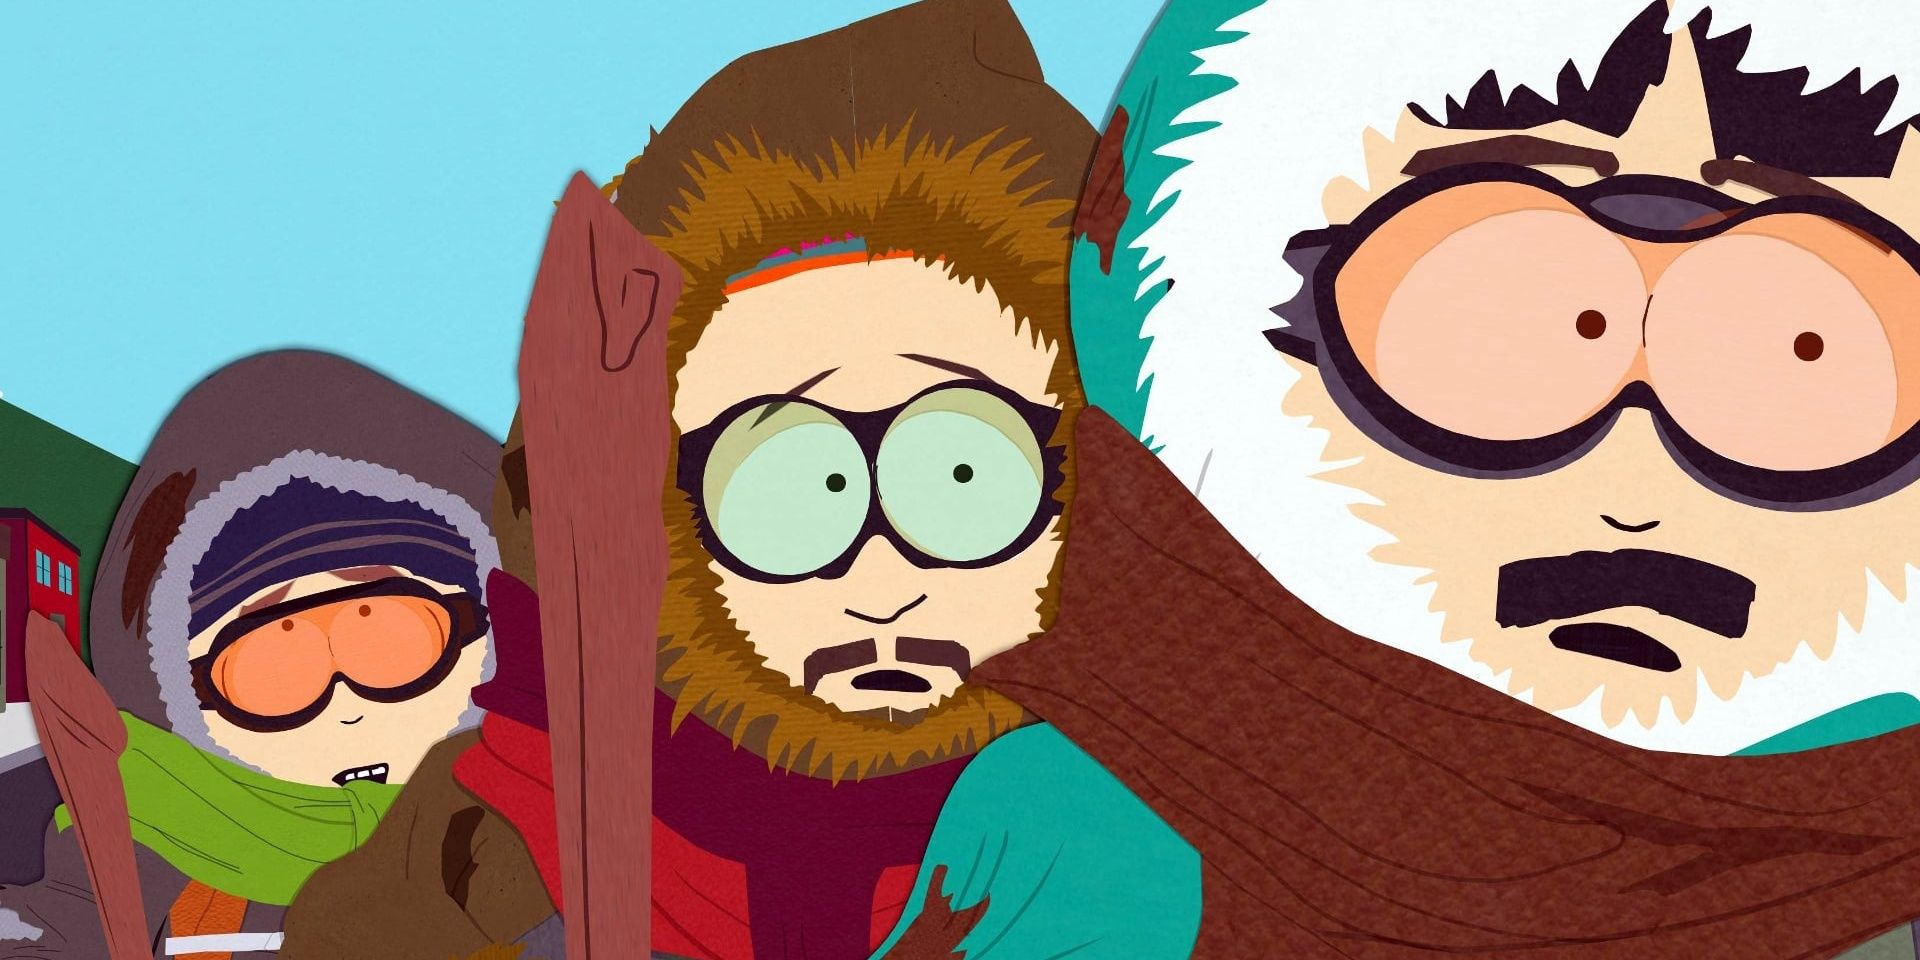 Randy in Two Days Before the Day After Tomorrow, a South Park episode